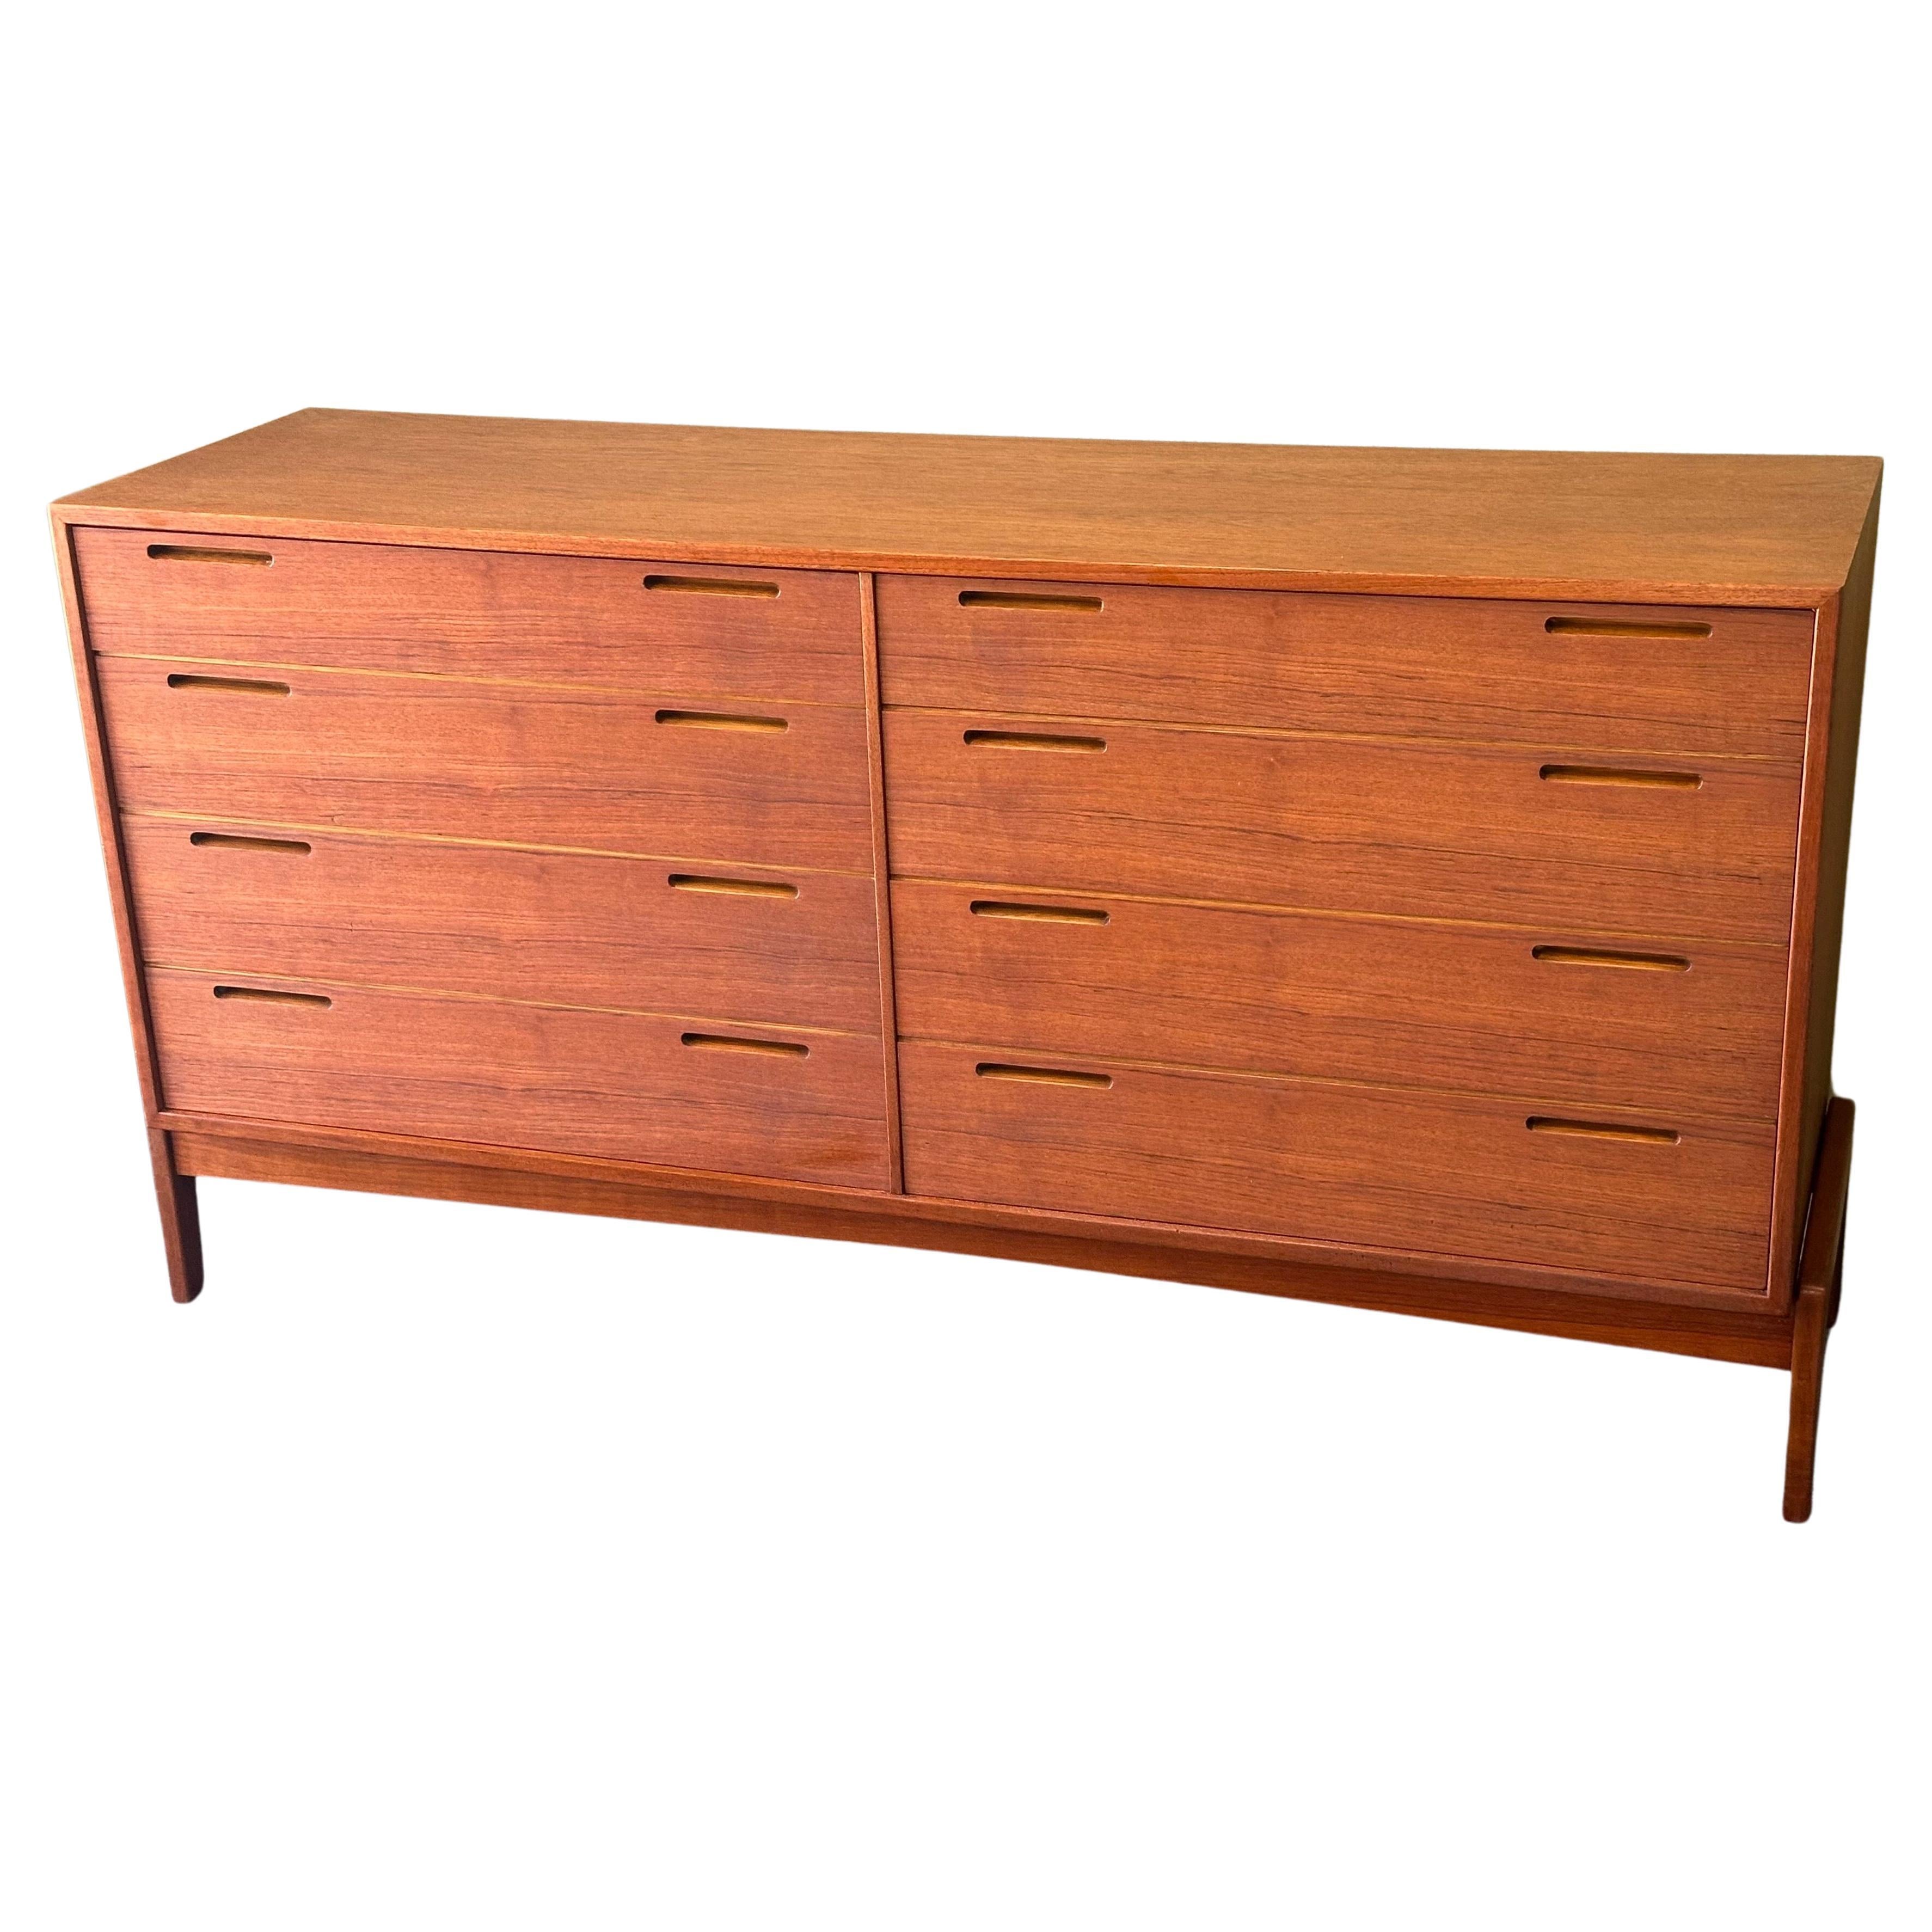 Absolutely gorgeous Danish modern eight-drawer teak dresser by William Watting, circa 1960s. The piece has been professionally refinished and looks fantastic! It is of superb quality with a finished back that would allow it to float in a room.  The